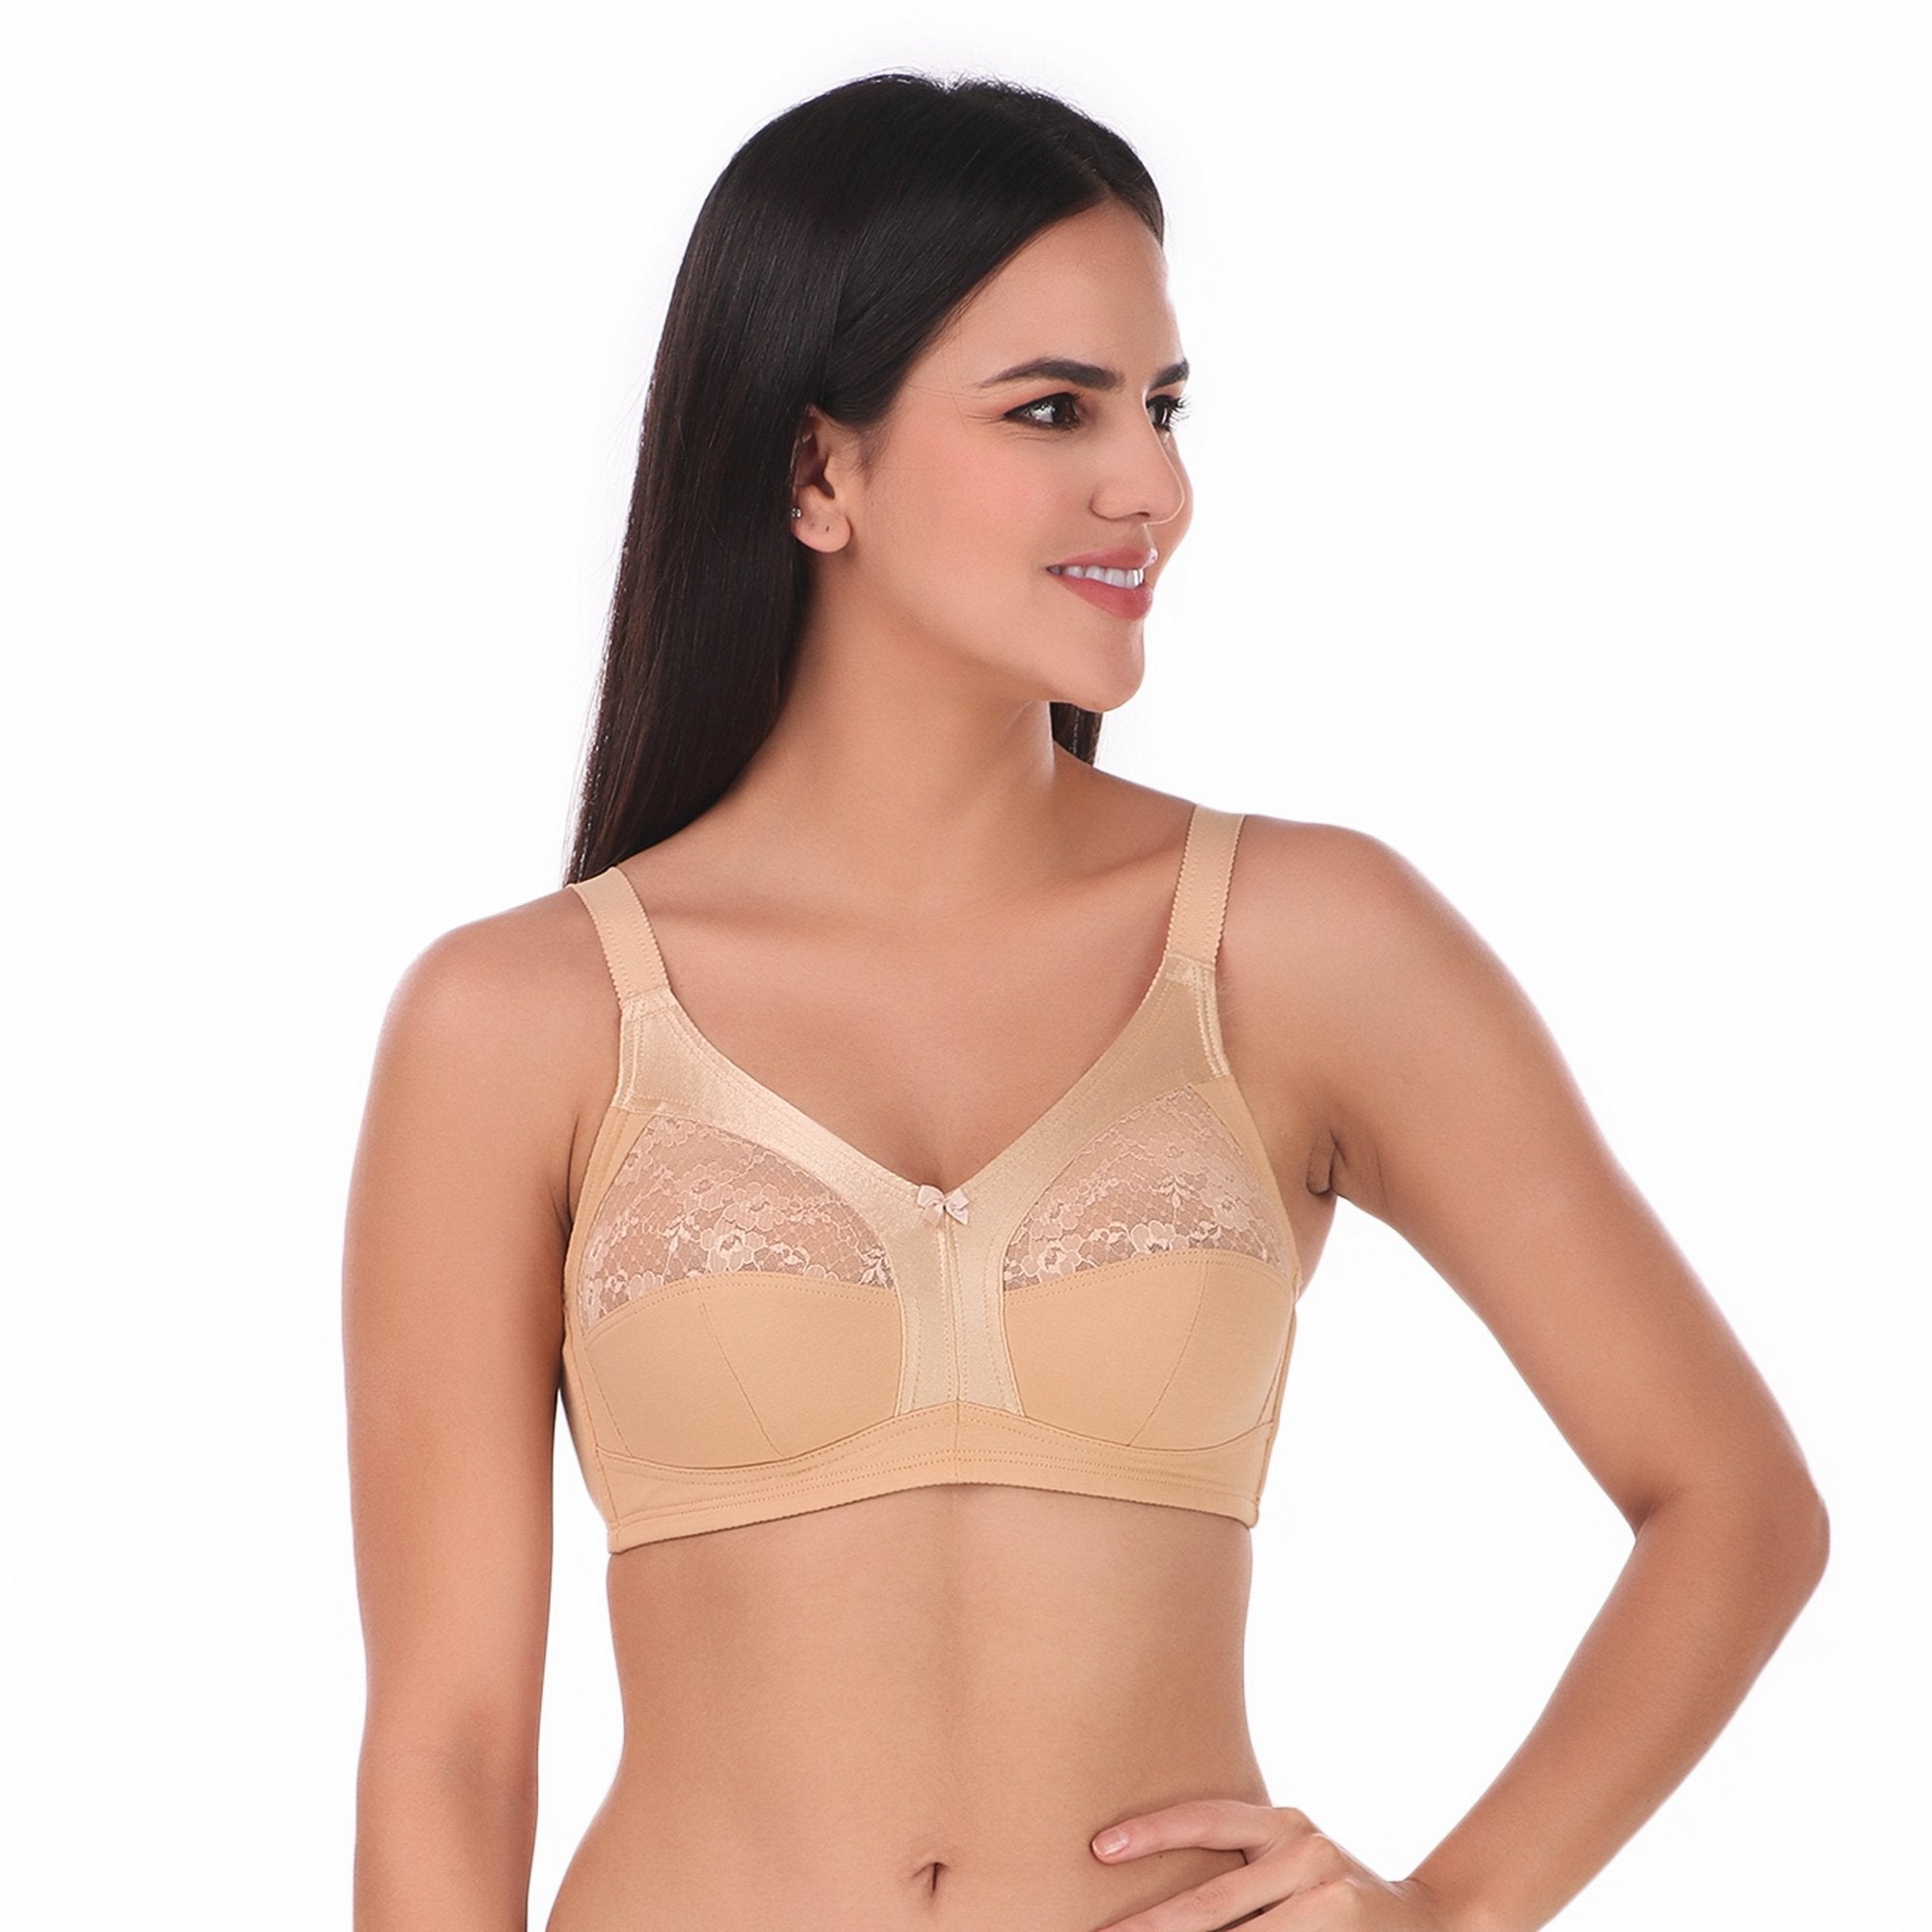 Meesho Supply - Whatsapp ->  (+918954478349) Catalog  Name: *Ladies Cotton Hosiery Seamless Bras Vol 1* Fabric: Hosiery Cotton  Sleeves: Sleeves Are Not Included Bust Size: S - 32 in, M 